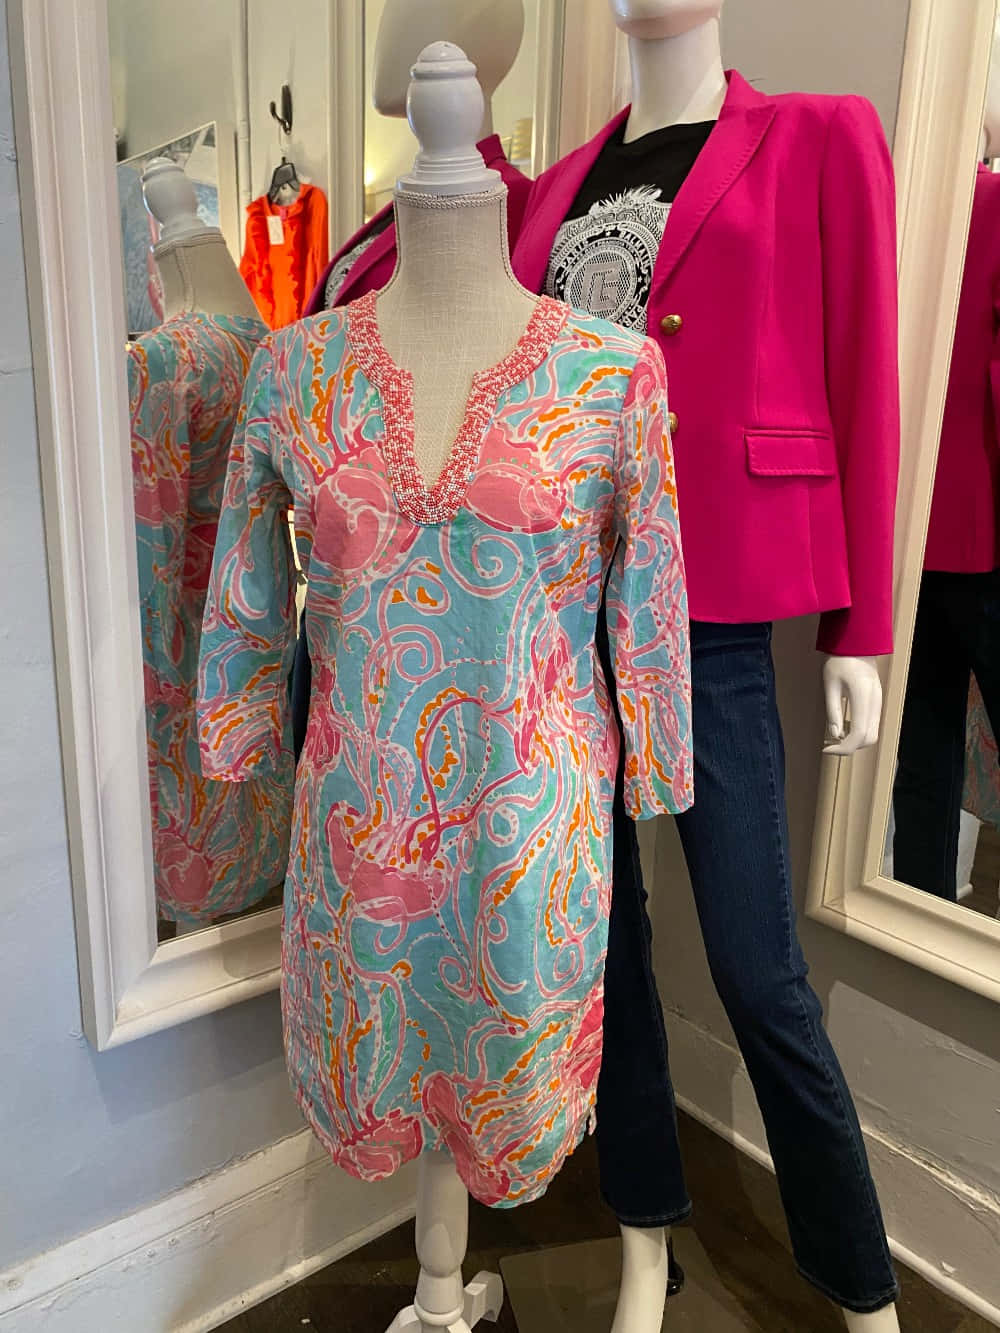 Get Bright and Bold Summer Style with Lilly Pulitzer